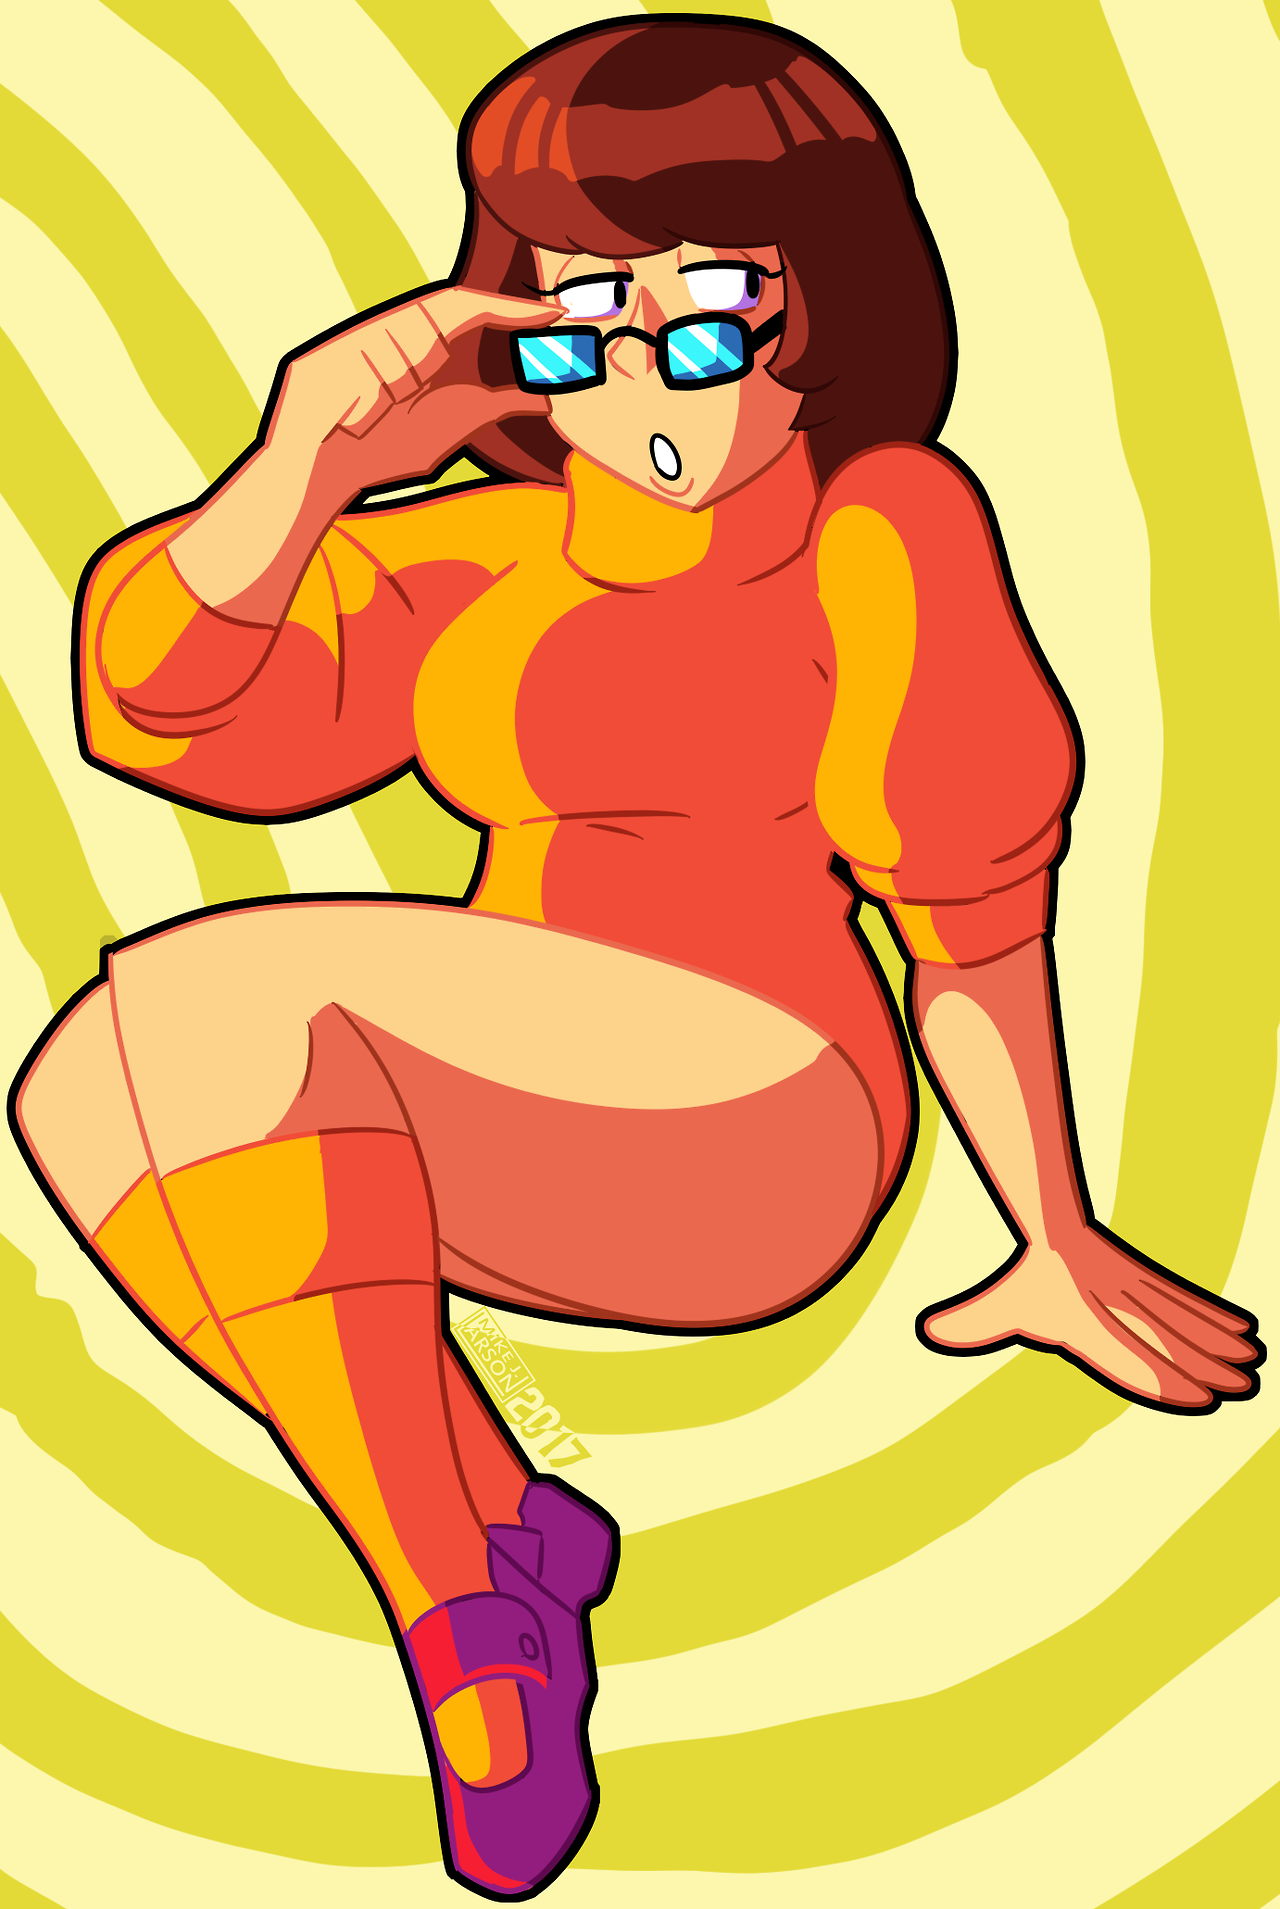 &hellip; What? I think Velma Dinkley is hot, I don’t need any excuse to draw